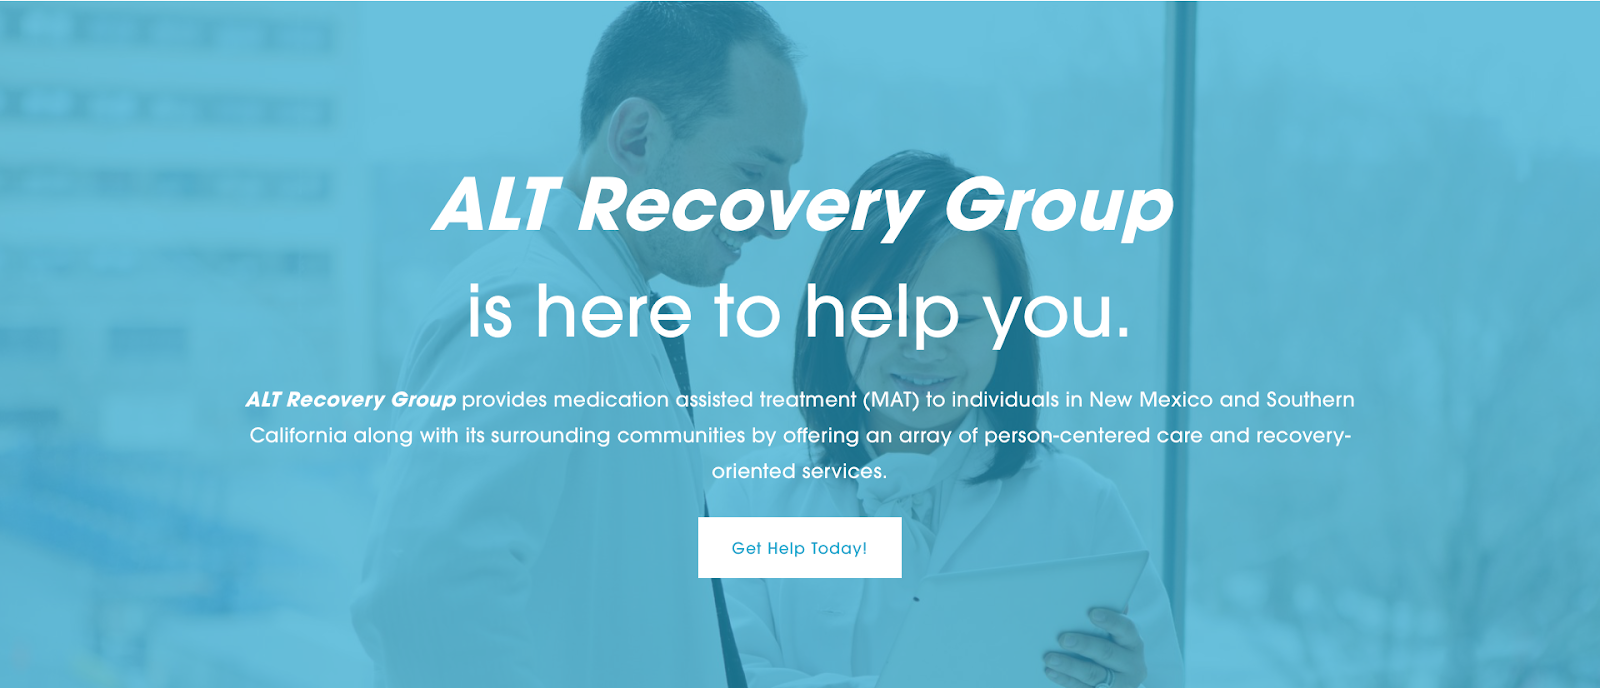 ALT Recovery Group